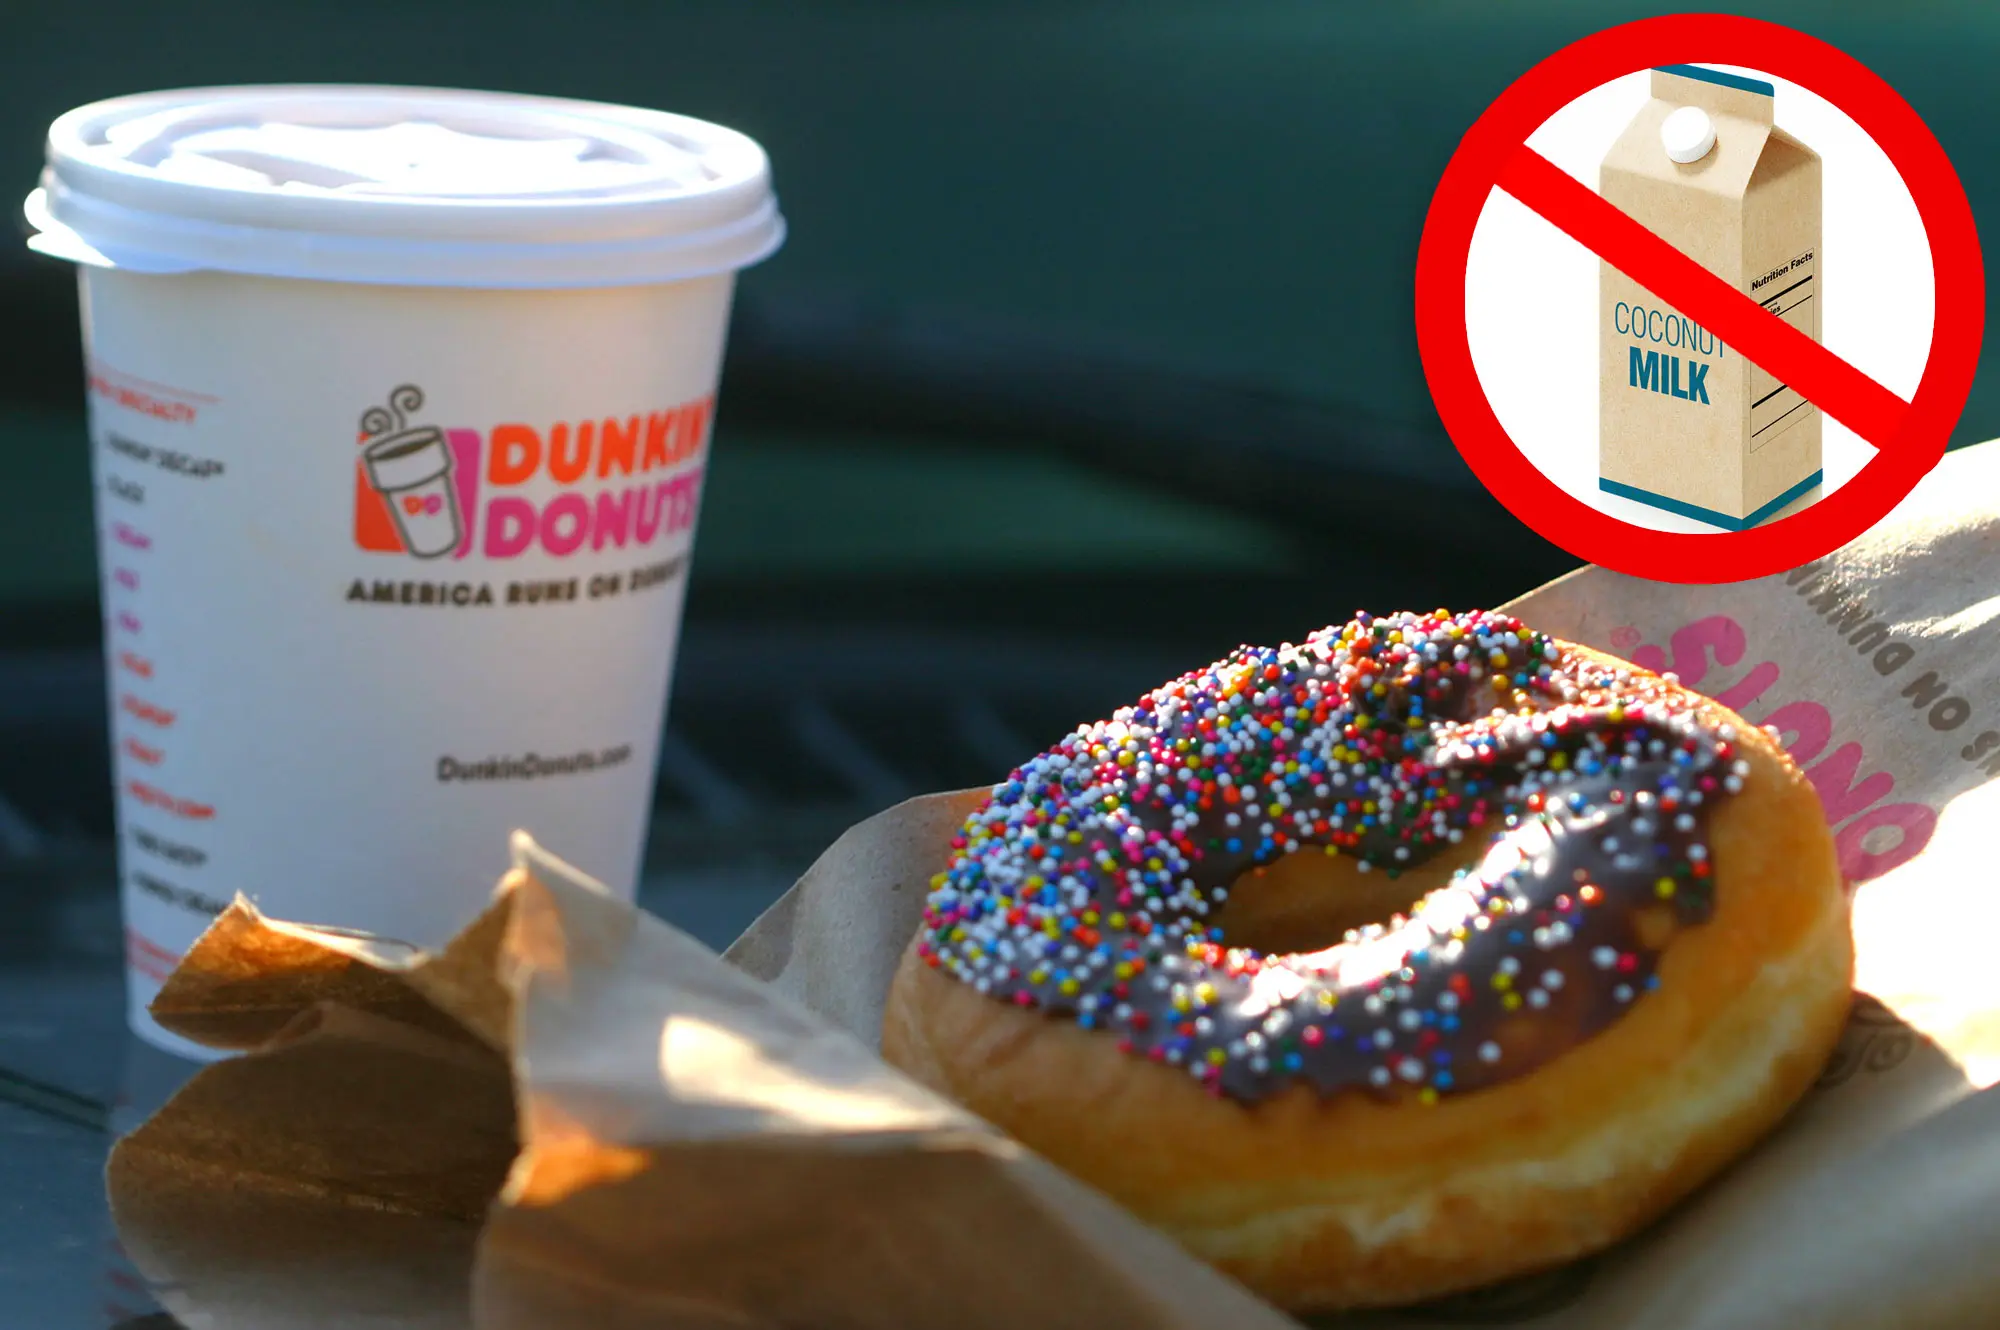 Dunkin' Bids Farewell to Coconut Milk – What You Need to Know